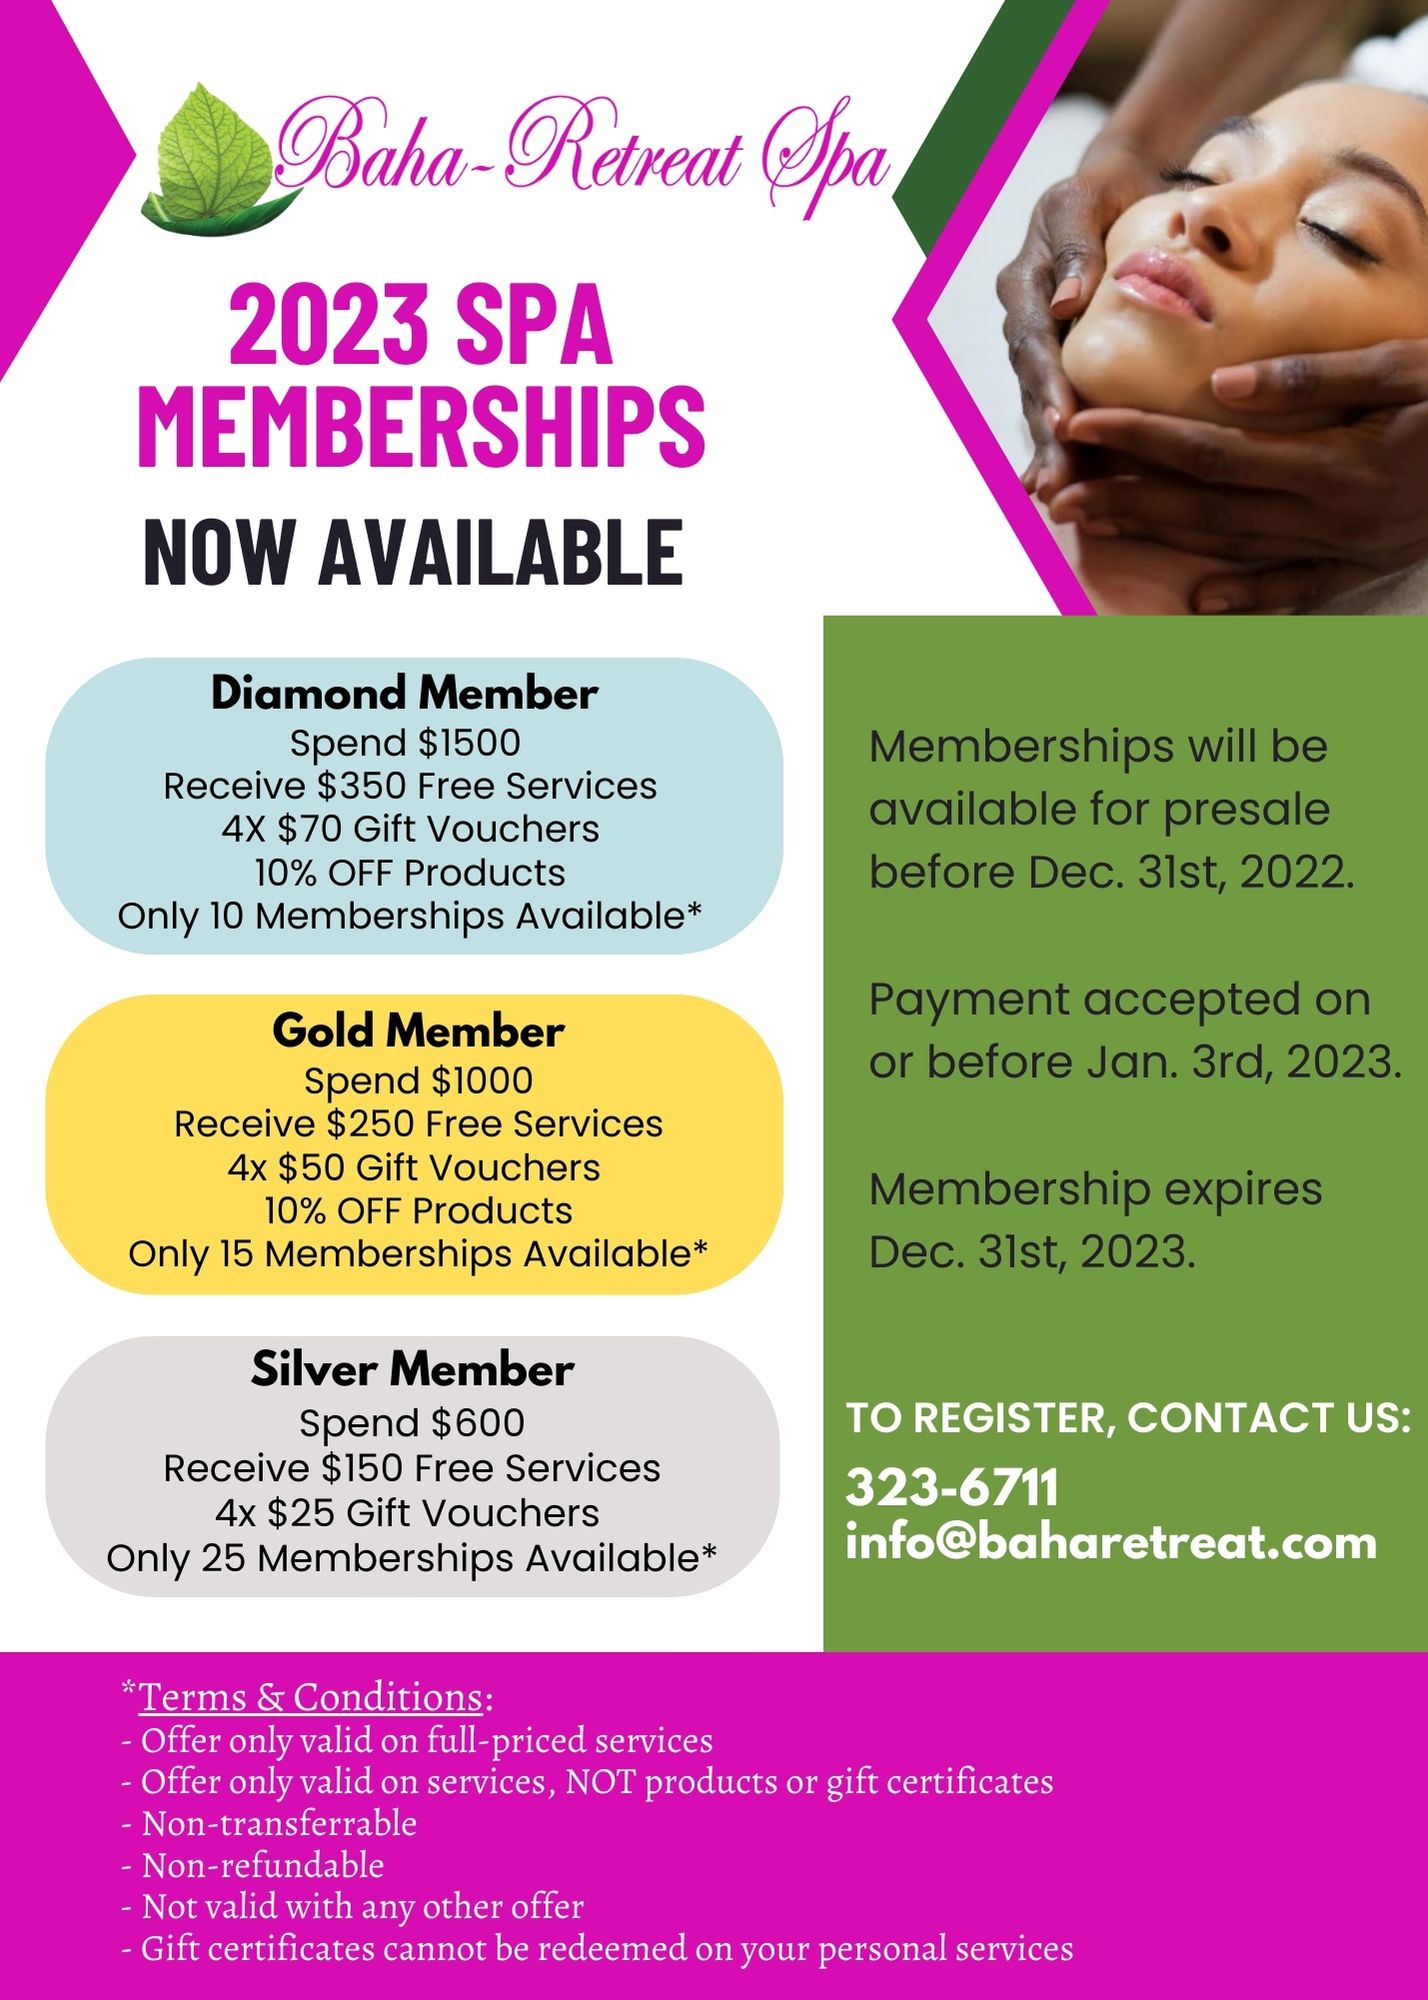 Click on Link Below to Purchase 2023 Spa Membership